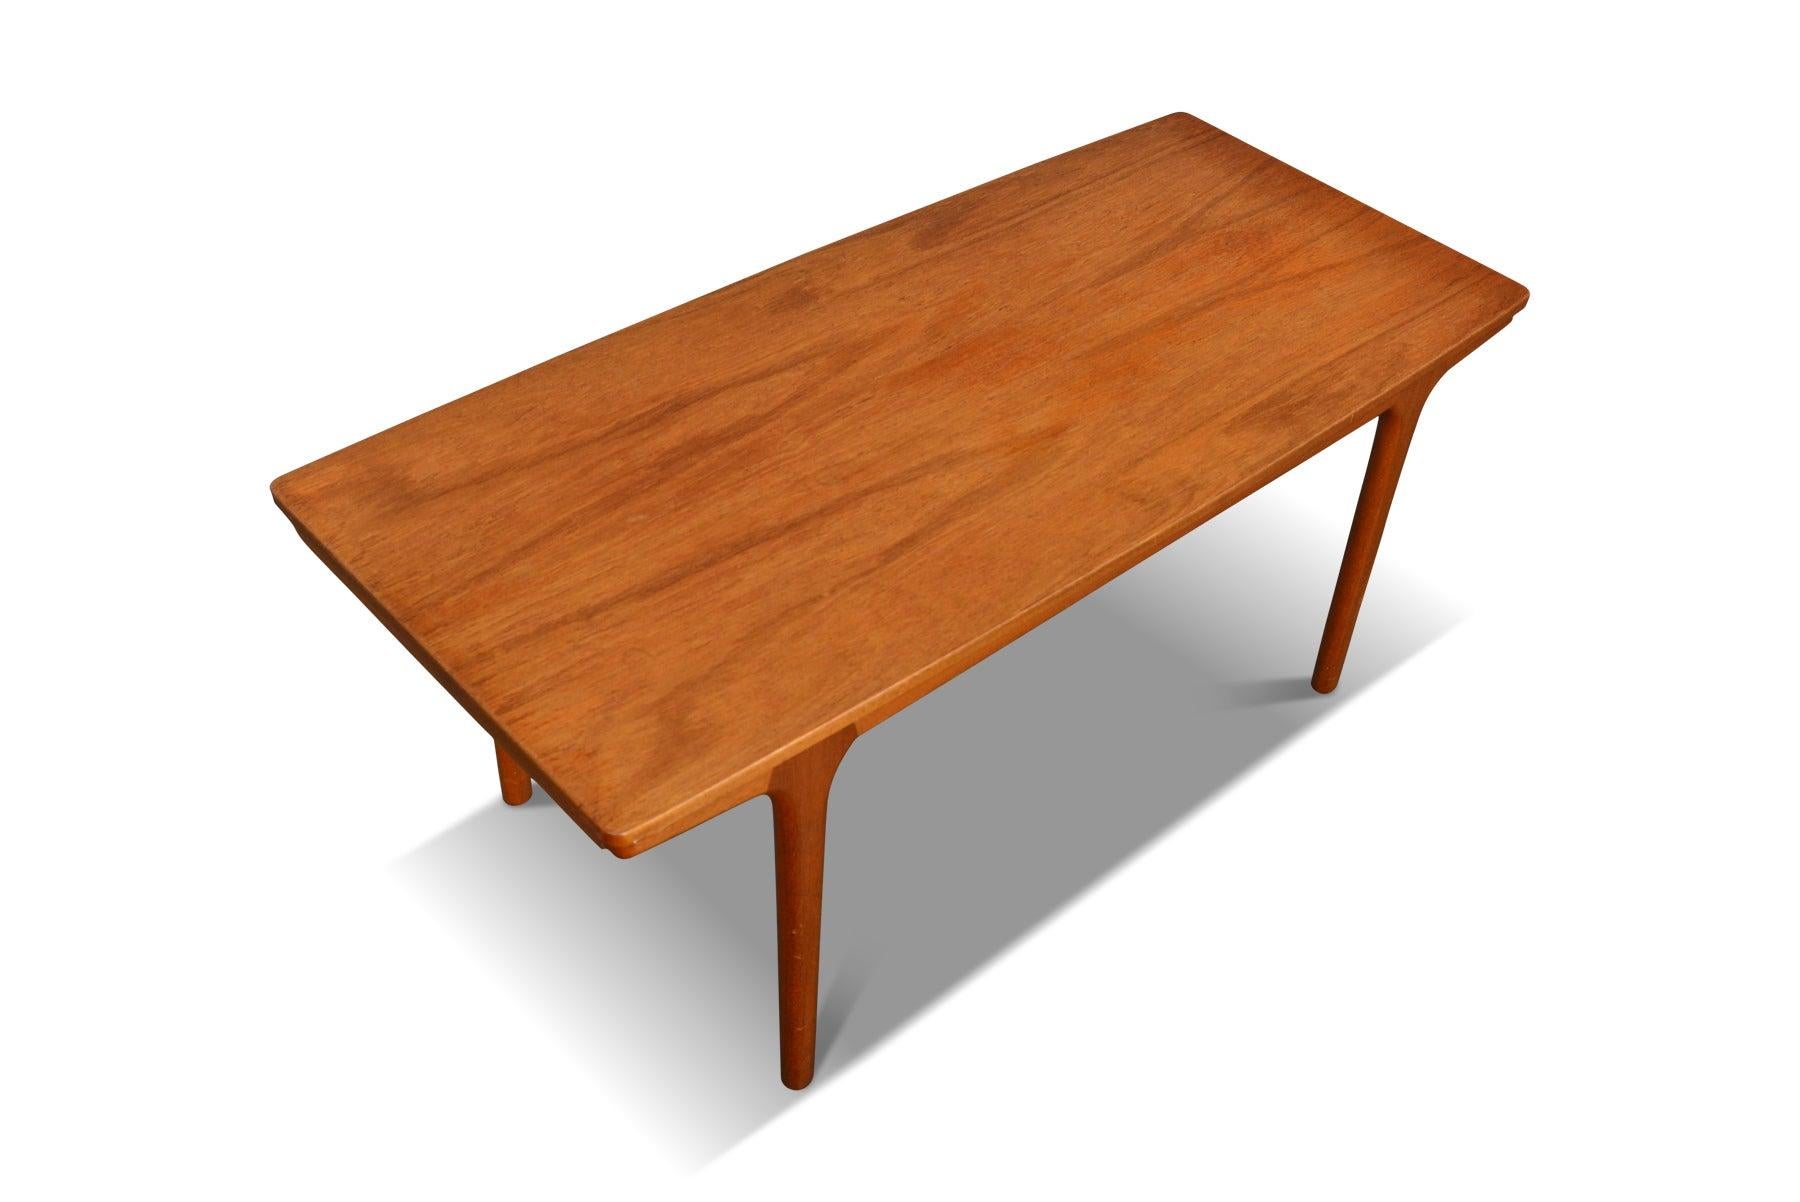 Scottish A.H. Mcintosh Teak Surfboard Coffee Table with Pullout Drink Trays #1